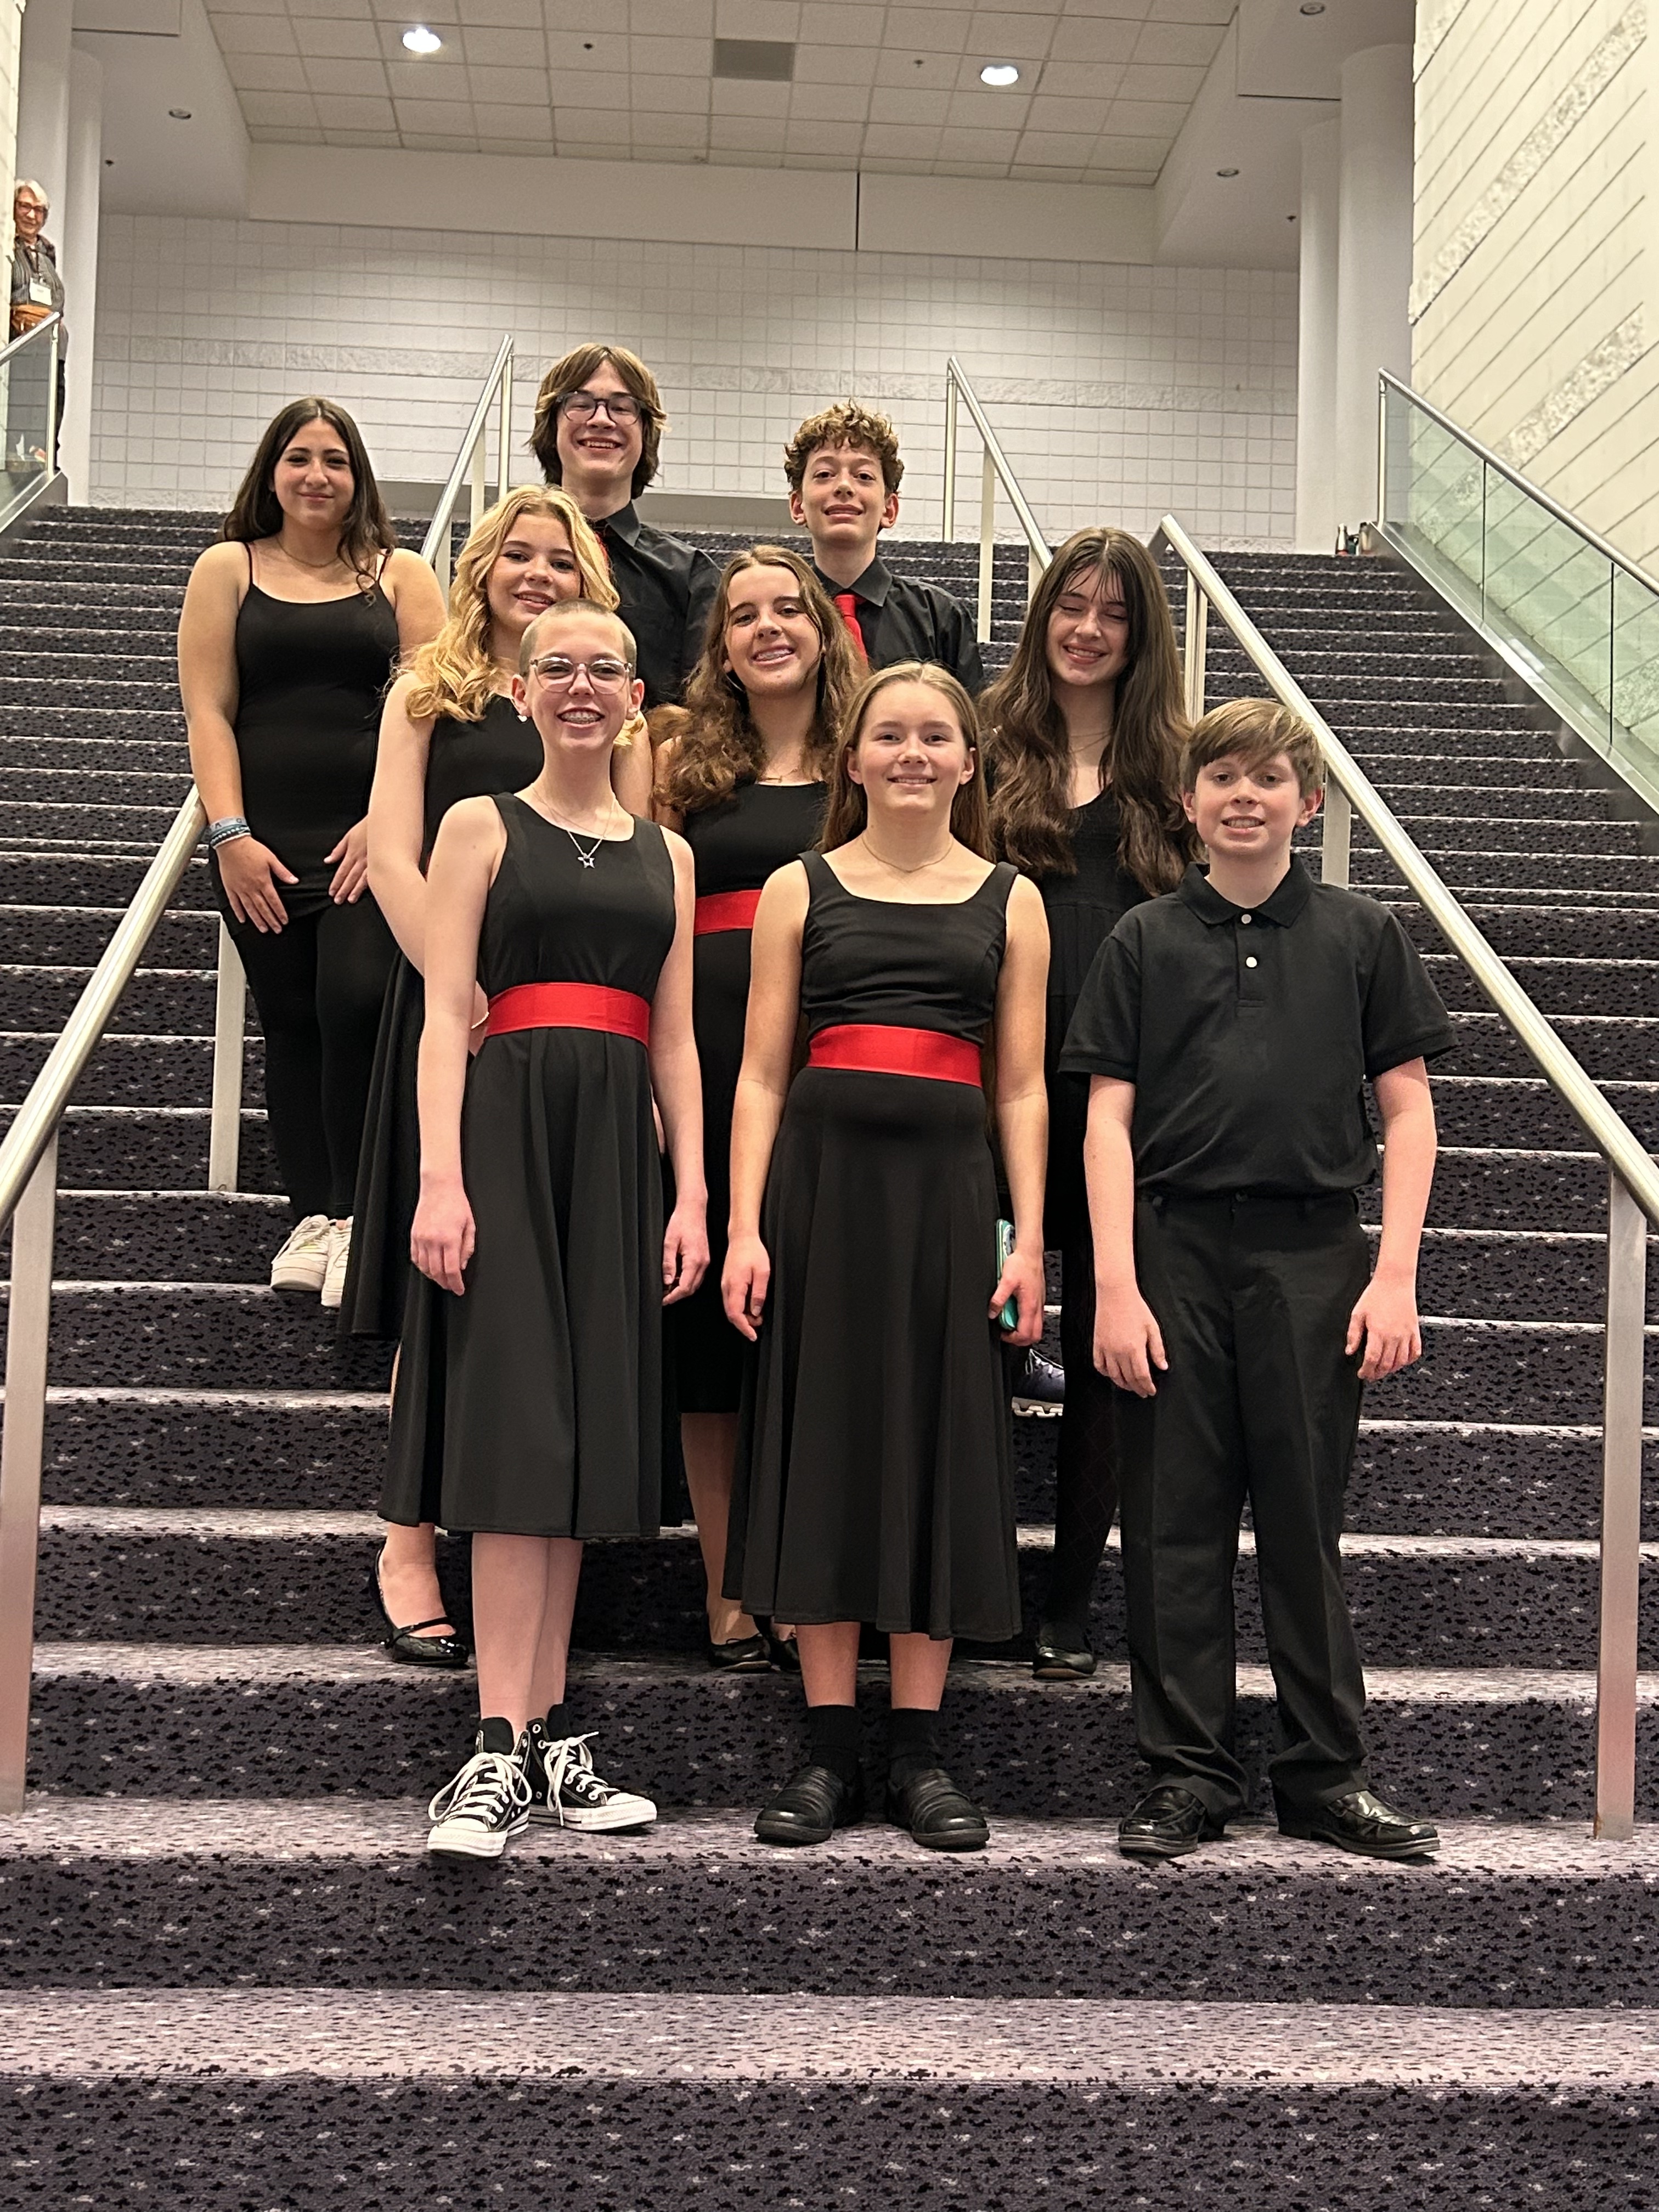 Nine choir students, a mix of male and female, stand on stairs